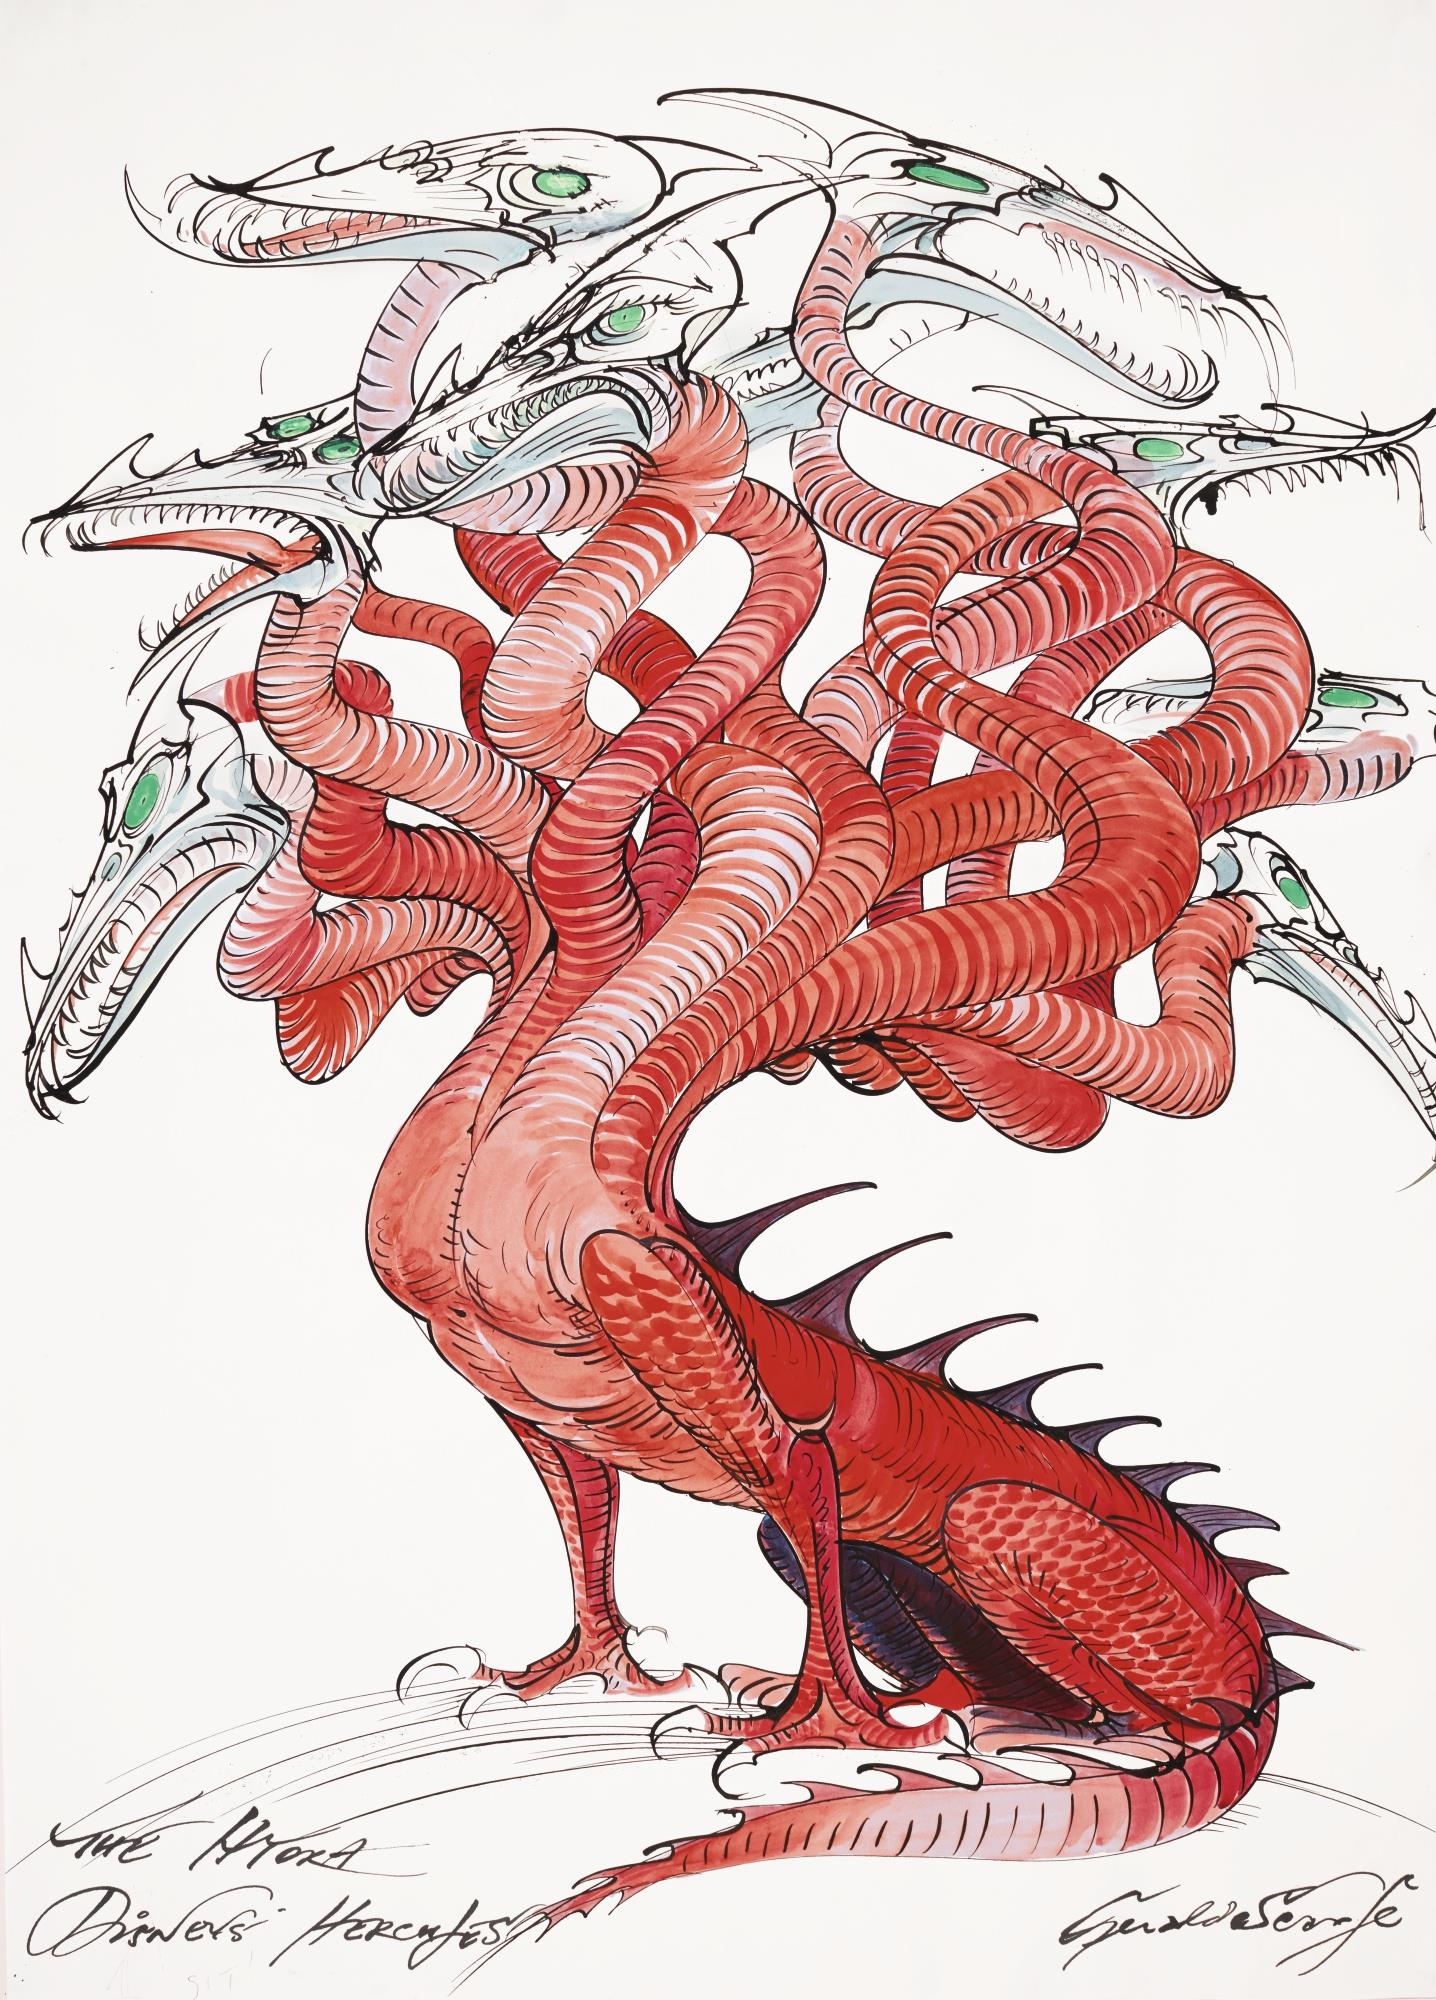 The Hydra by Gerald Scarfe